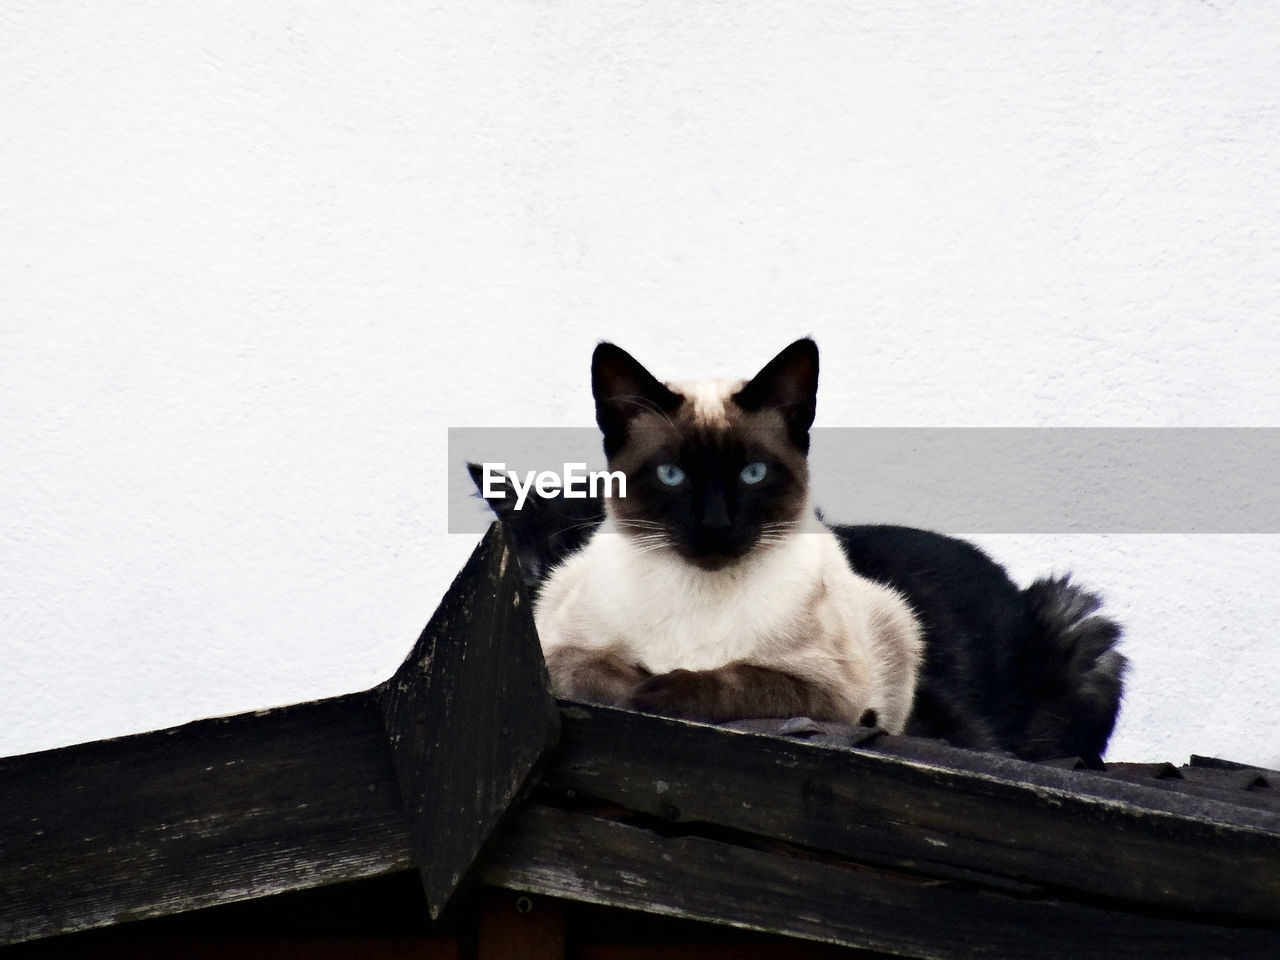 animal themes, animal, cat, mammal, pet, domestic animals, one animal, domestic cat, feline, black, white, wall - building feature, wood, whiskers, no people, felidae, small to medium-sized cats, portrait, looking at camera, sitting, relaxation, carnivore